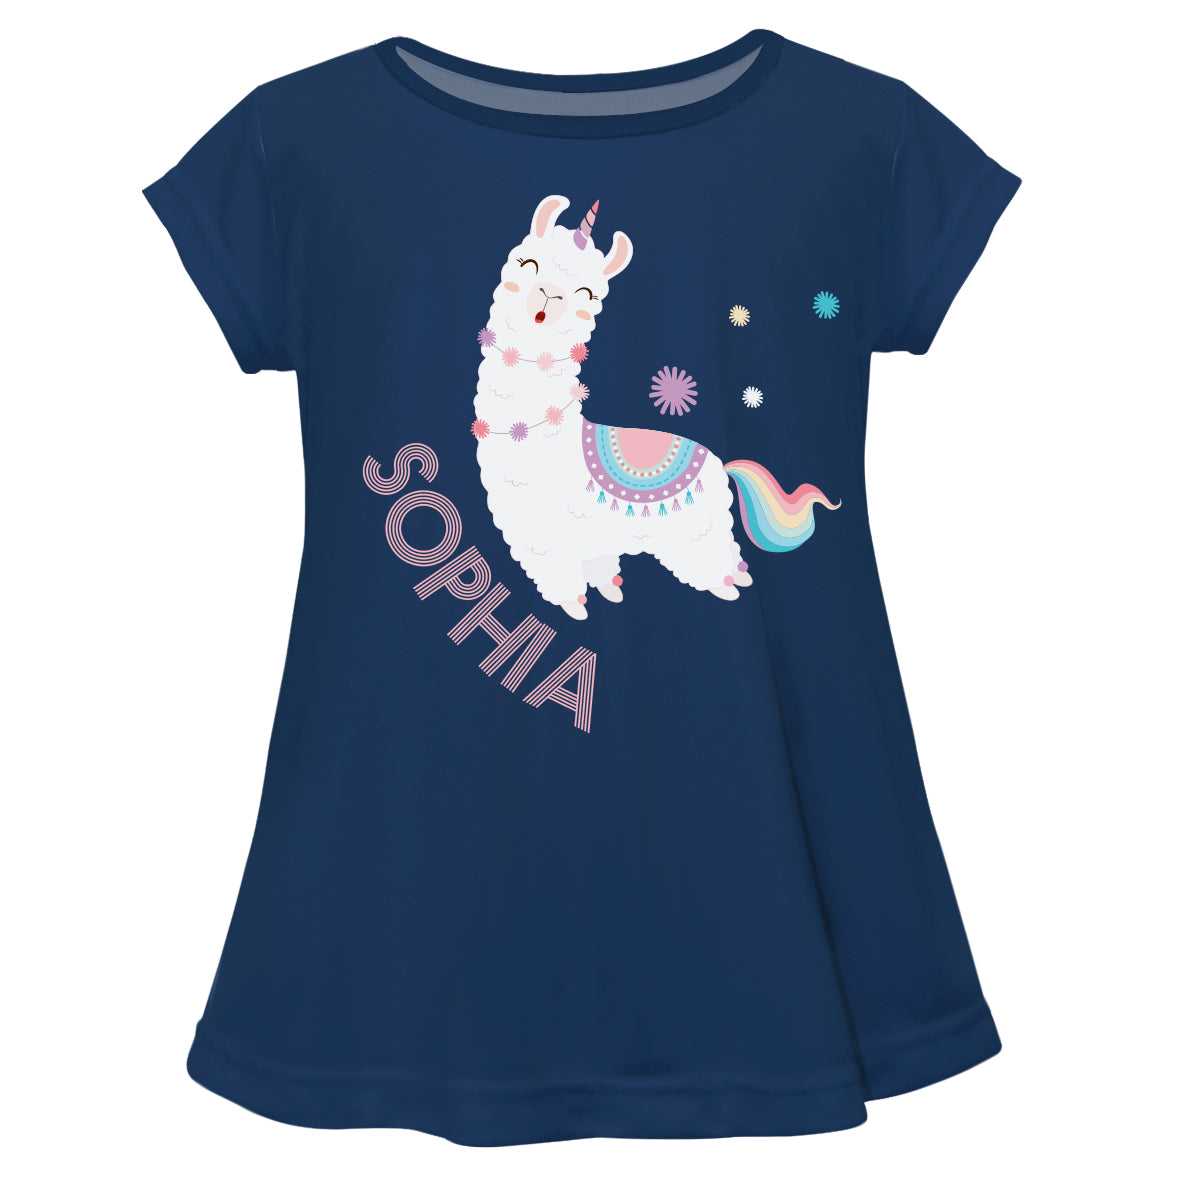 Navy and white llama girls blouse with name - Wimziy&Co.